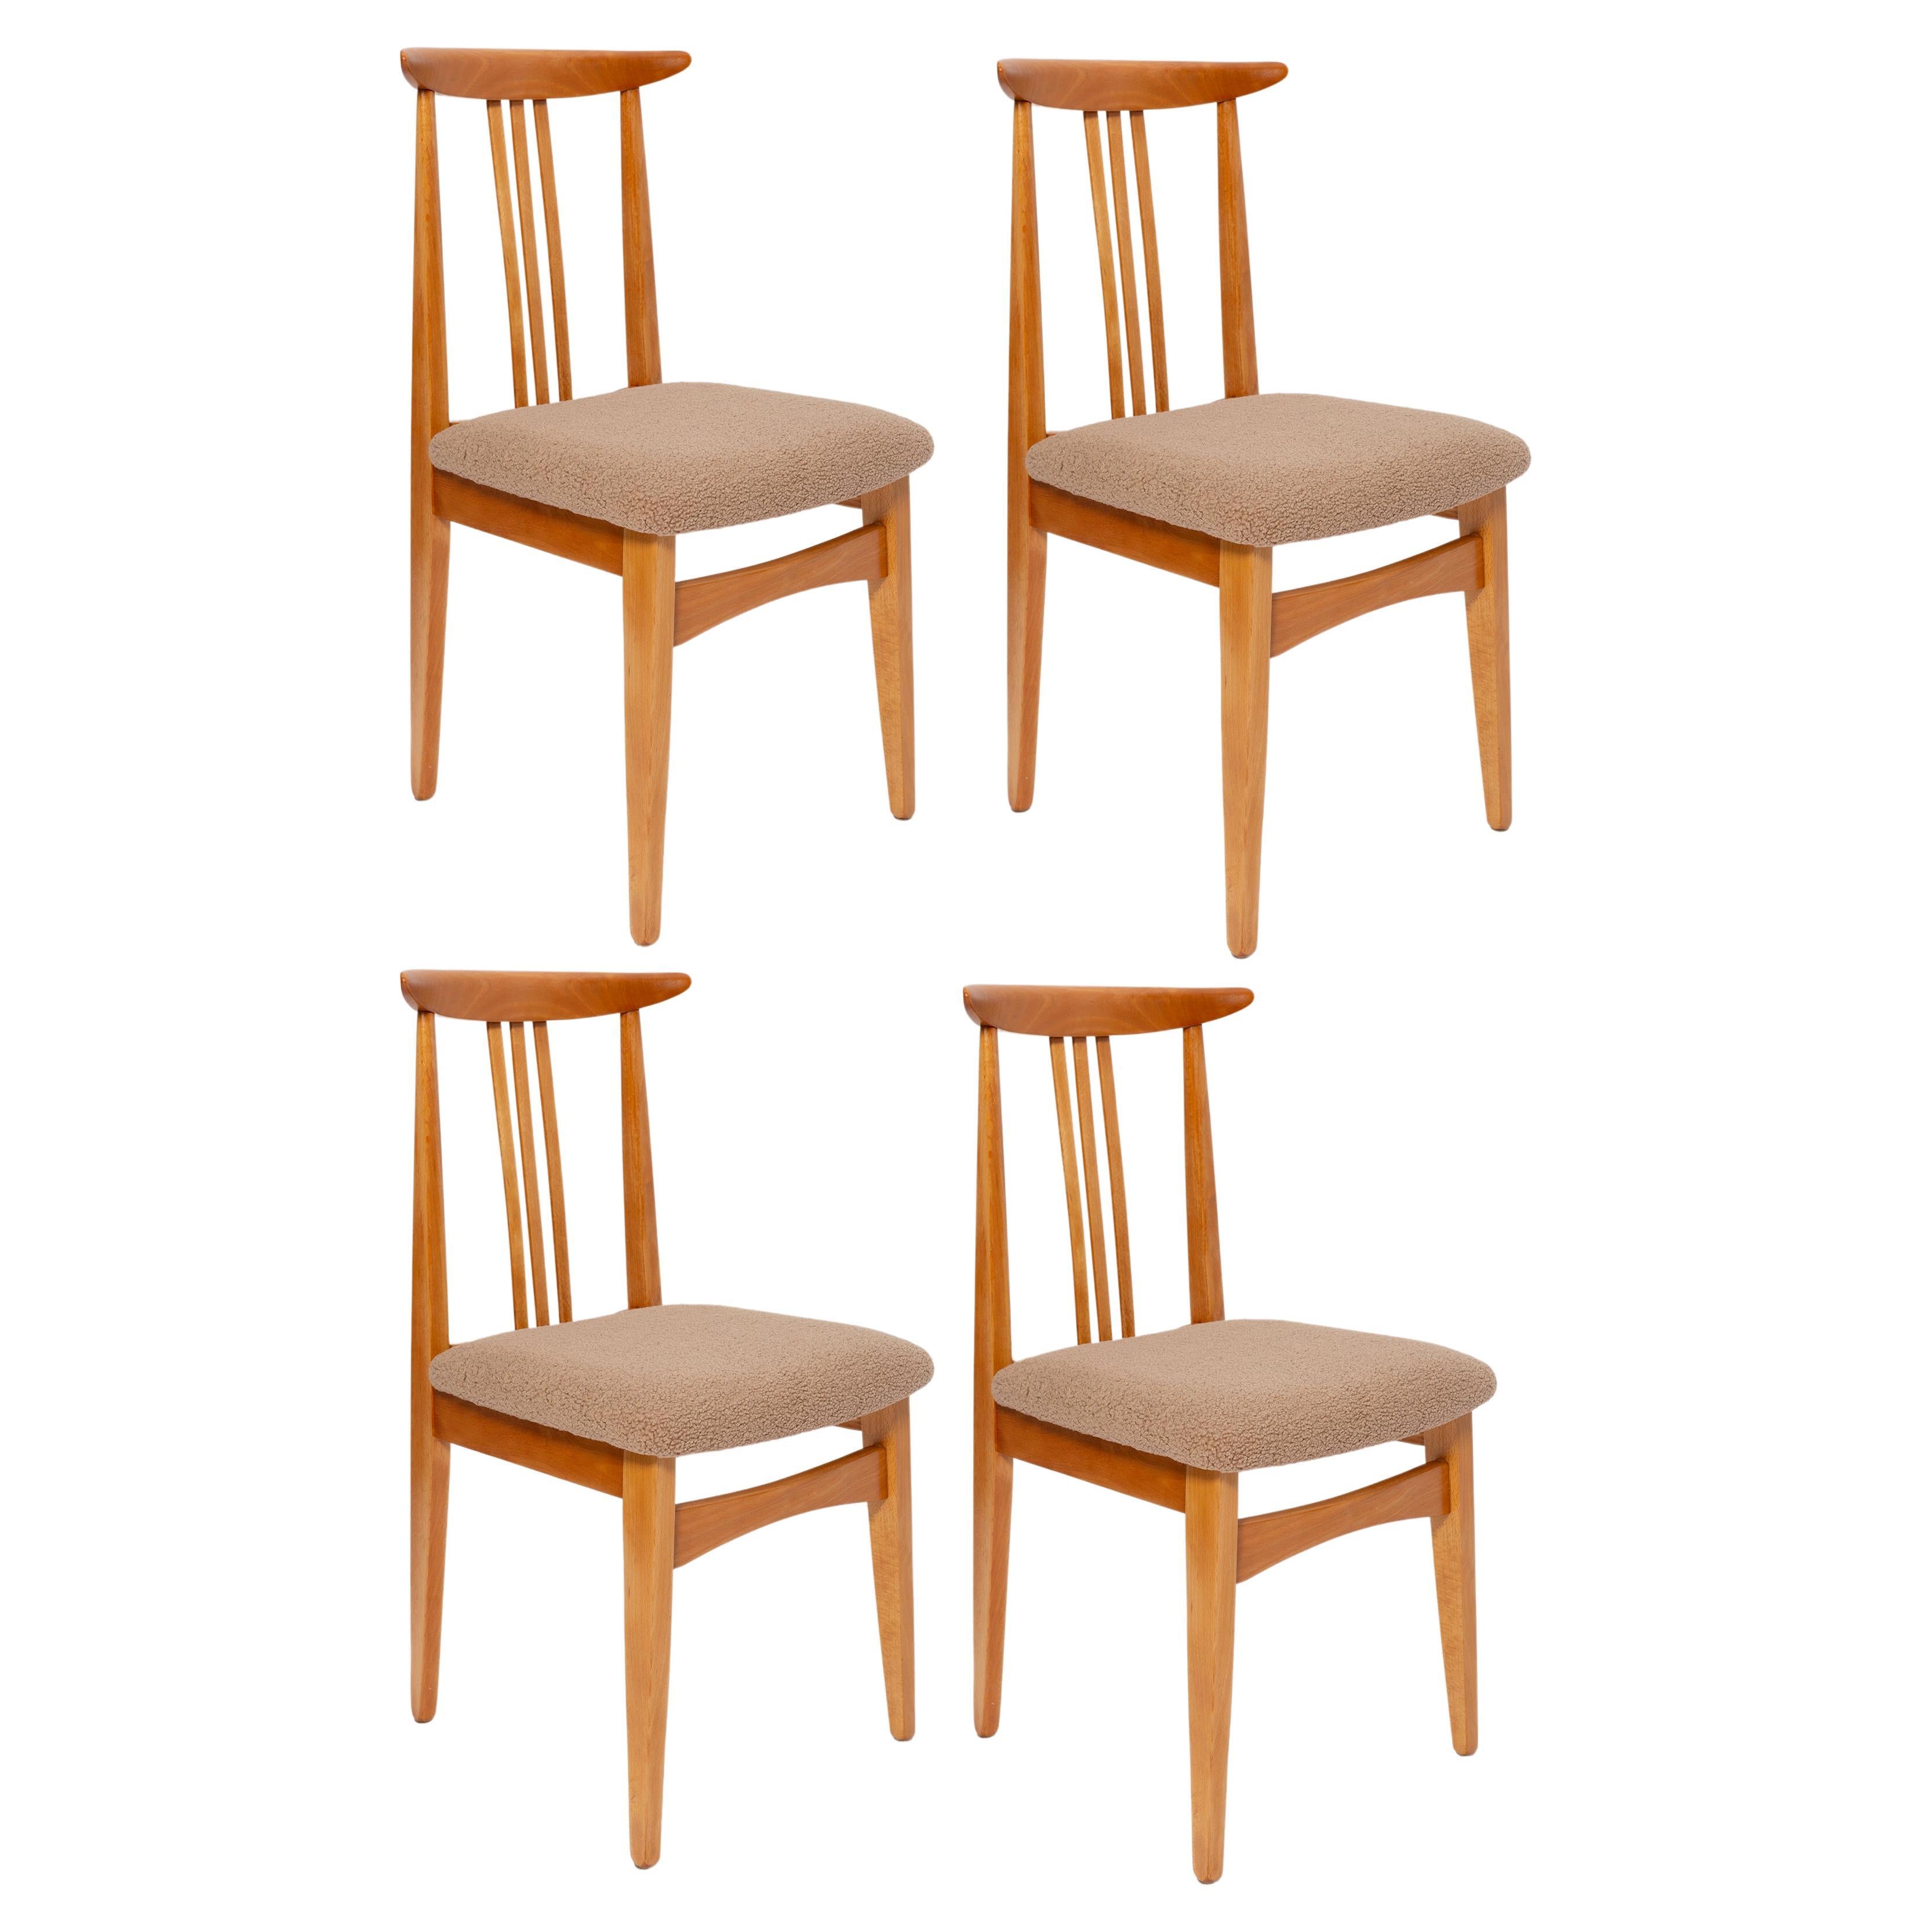 Set of 4 Mid-Century Latte Boucle Chairs, Light Wood, M. Zielinski, Europe 1960s For Sale